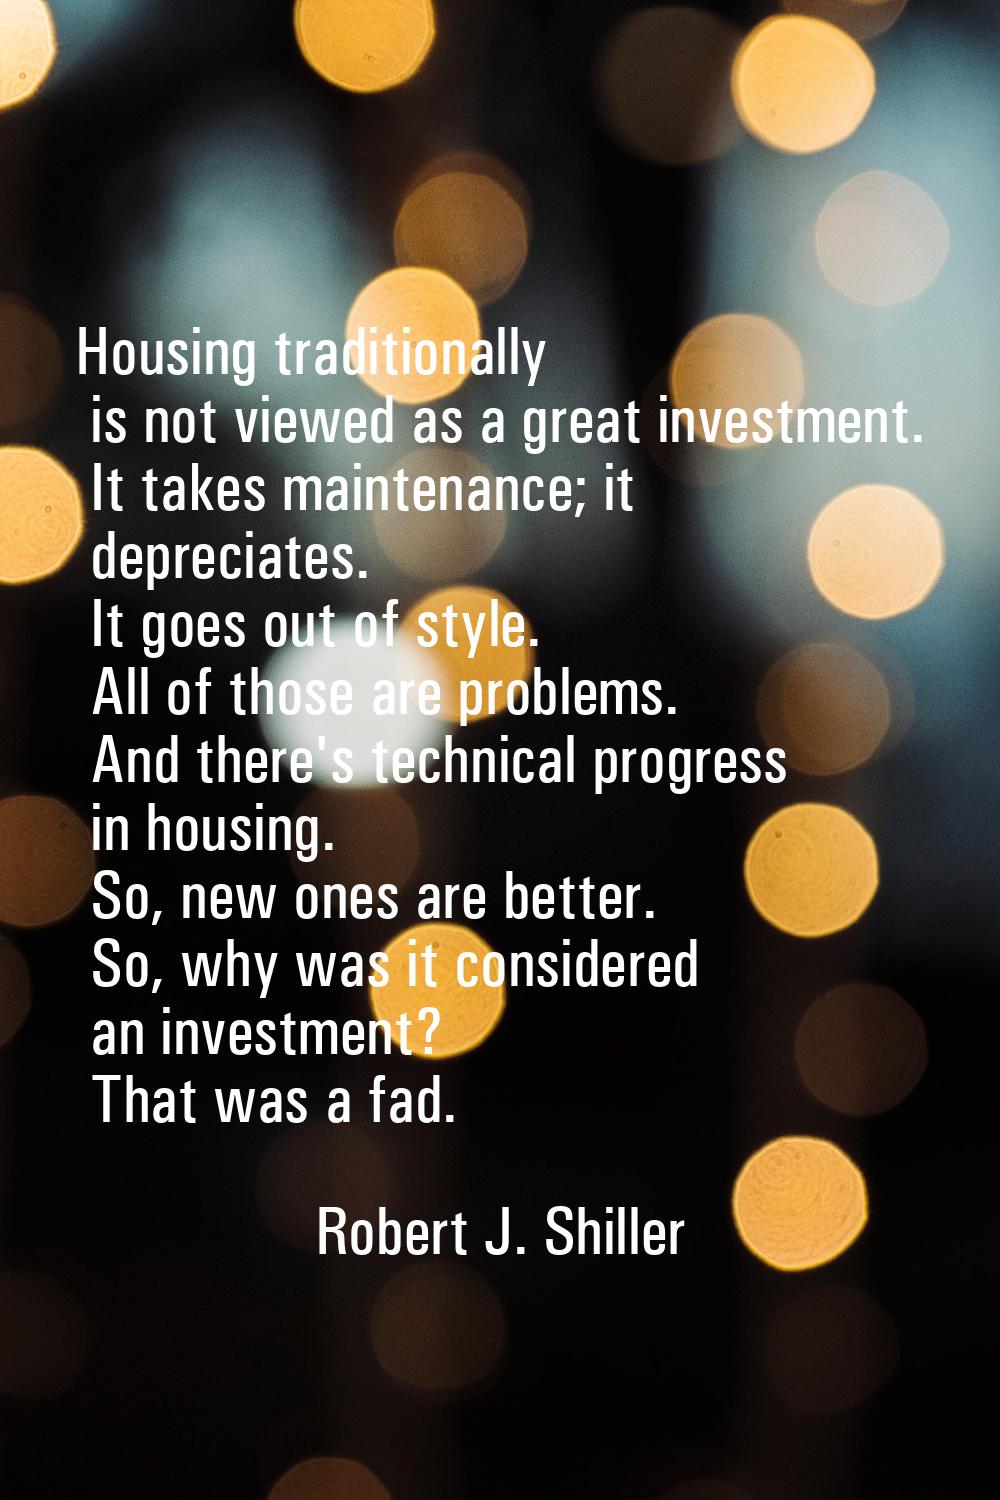 Housing traditionally is not viewed as a great investment. It takes maintenance; it depreciates. It